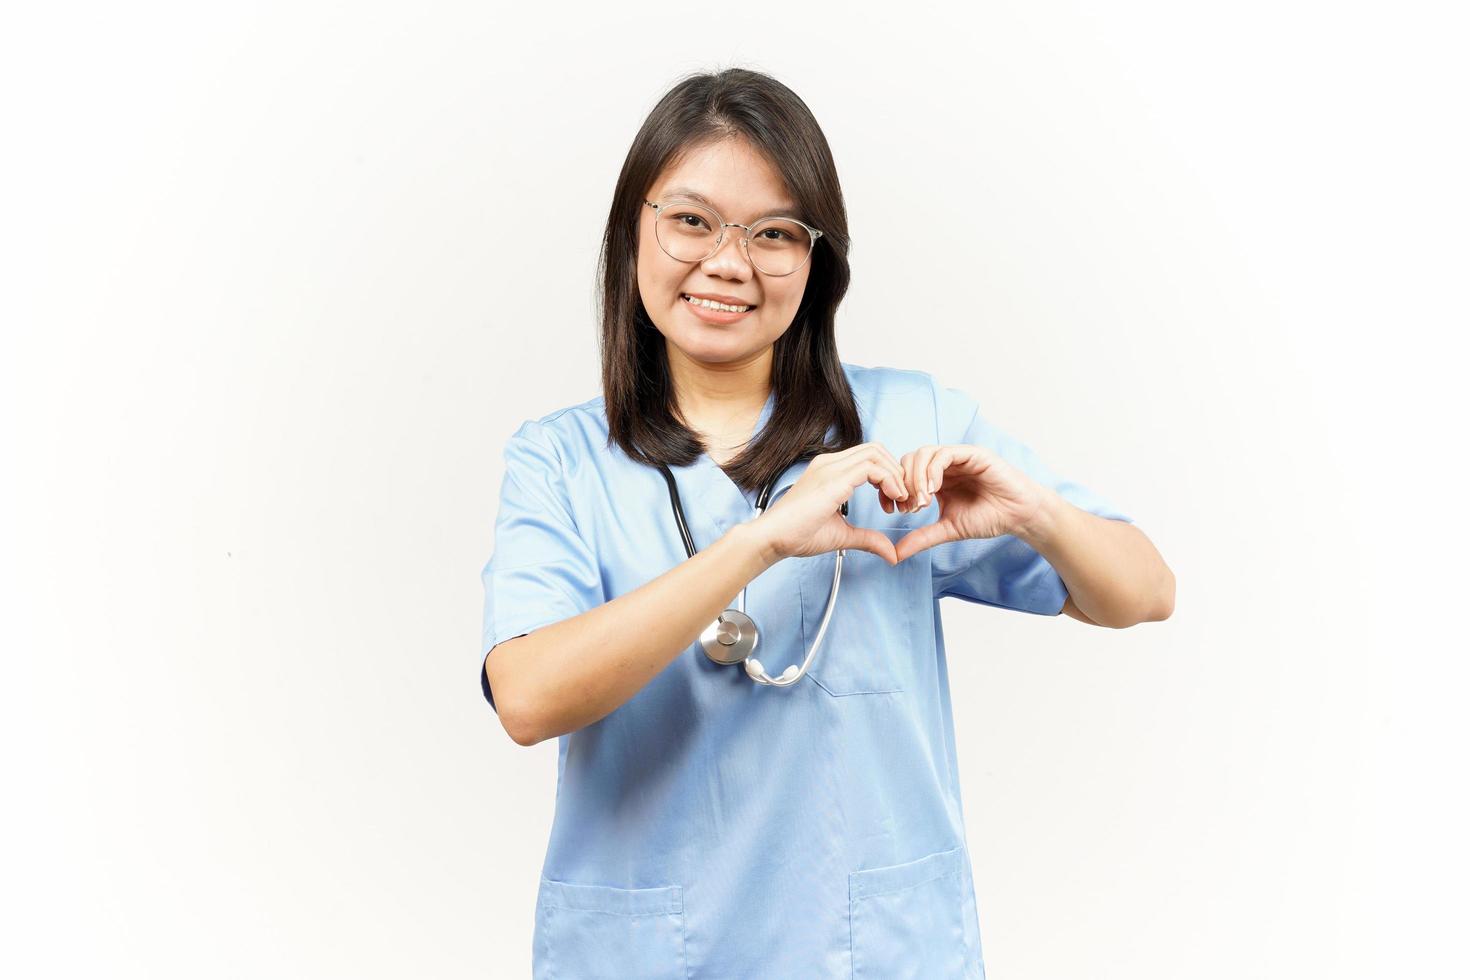 Showing Love or Heart Sign Of Asian Young Doctor Isolated On White Background photo